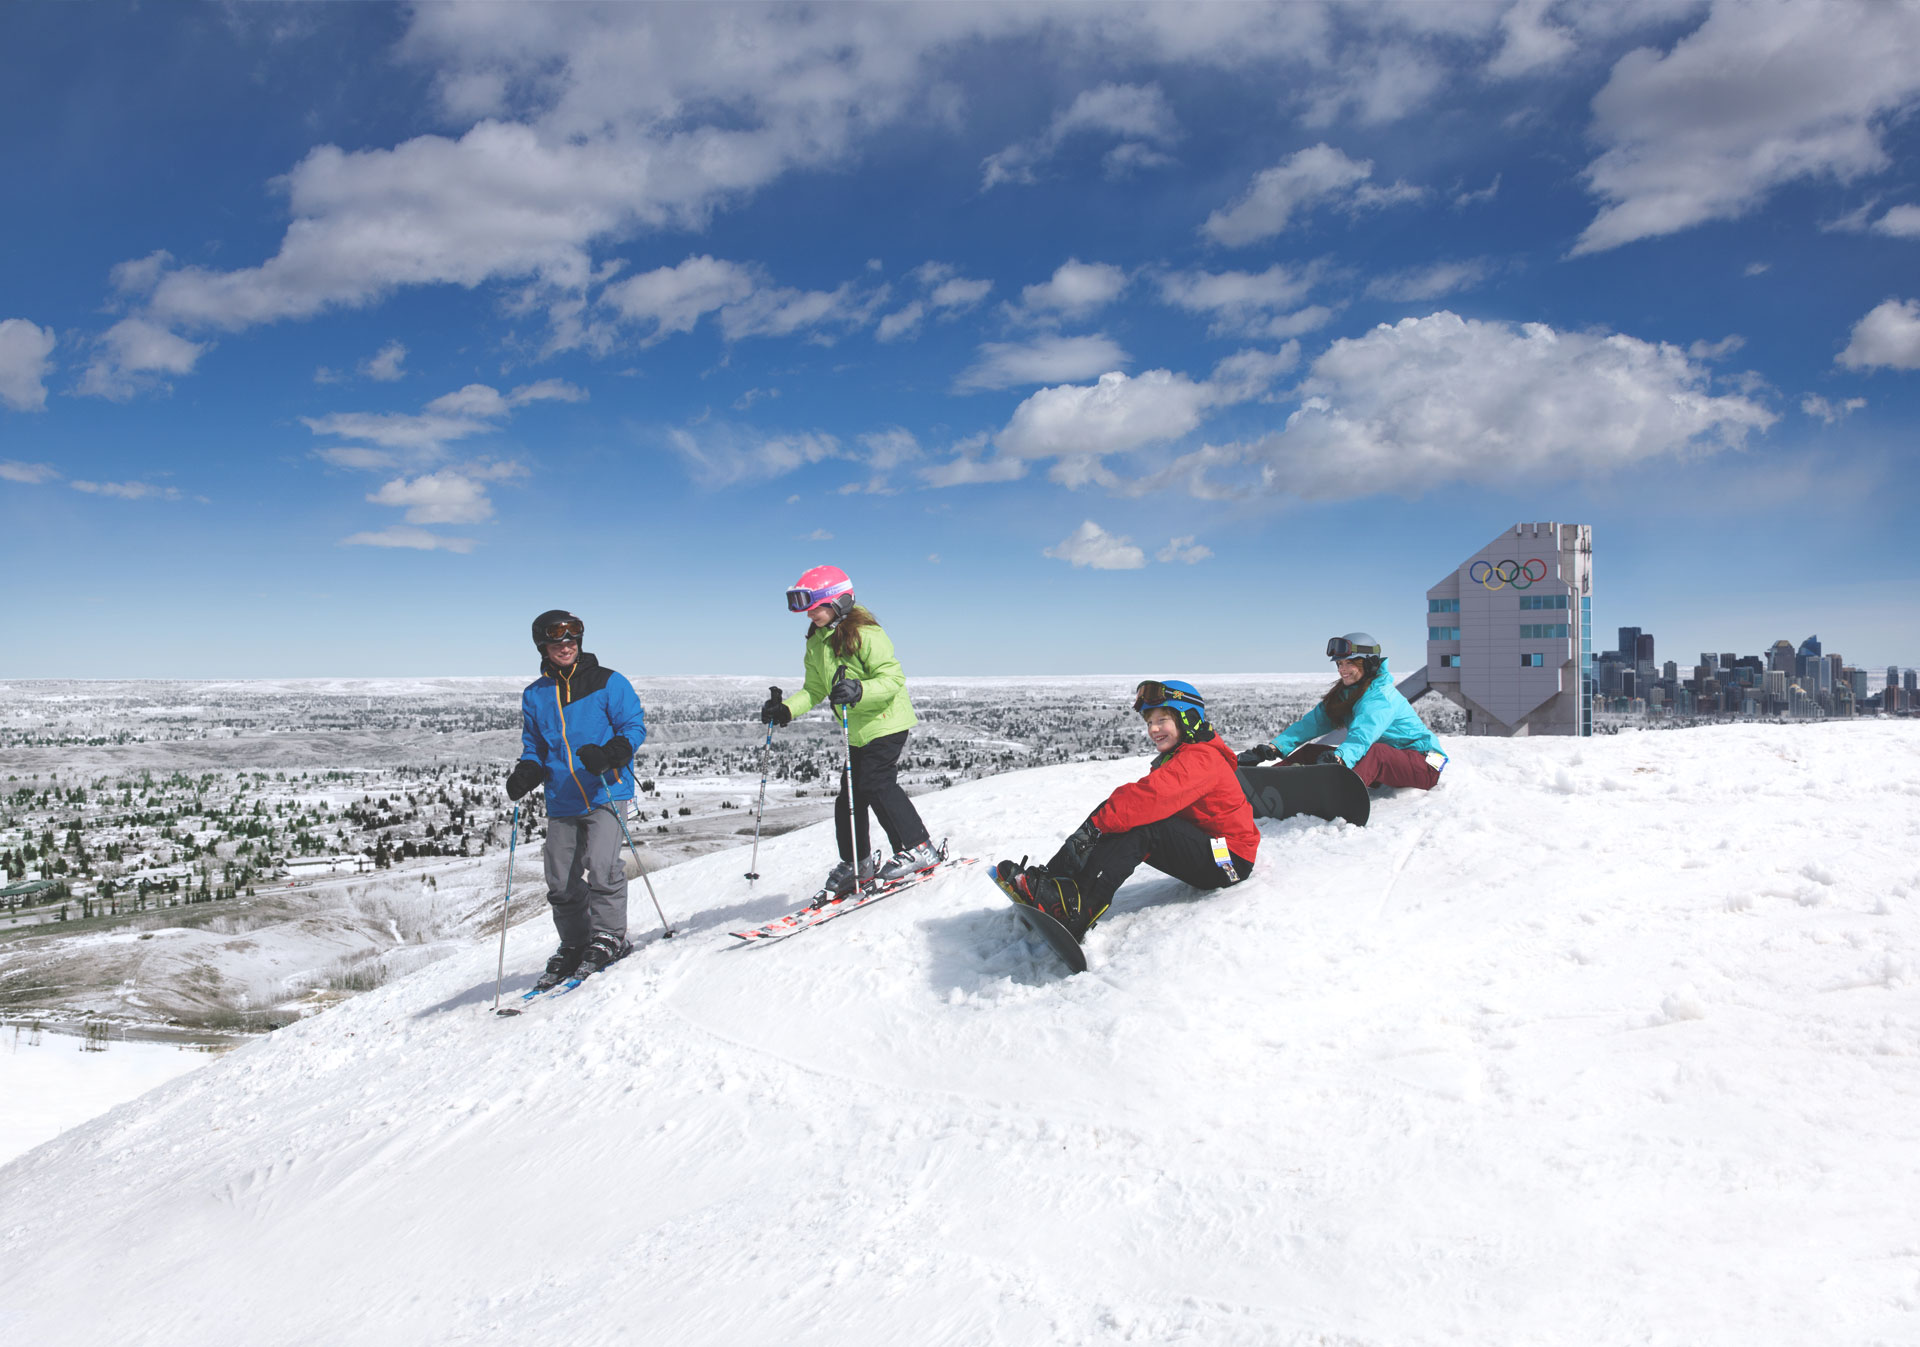 Learn to ski or snowboard at WinSport in Calgary.